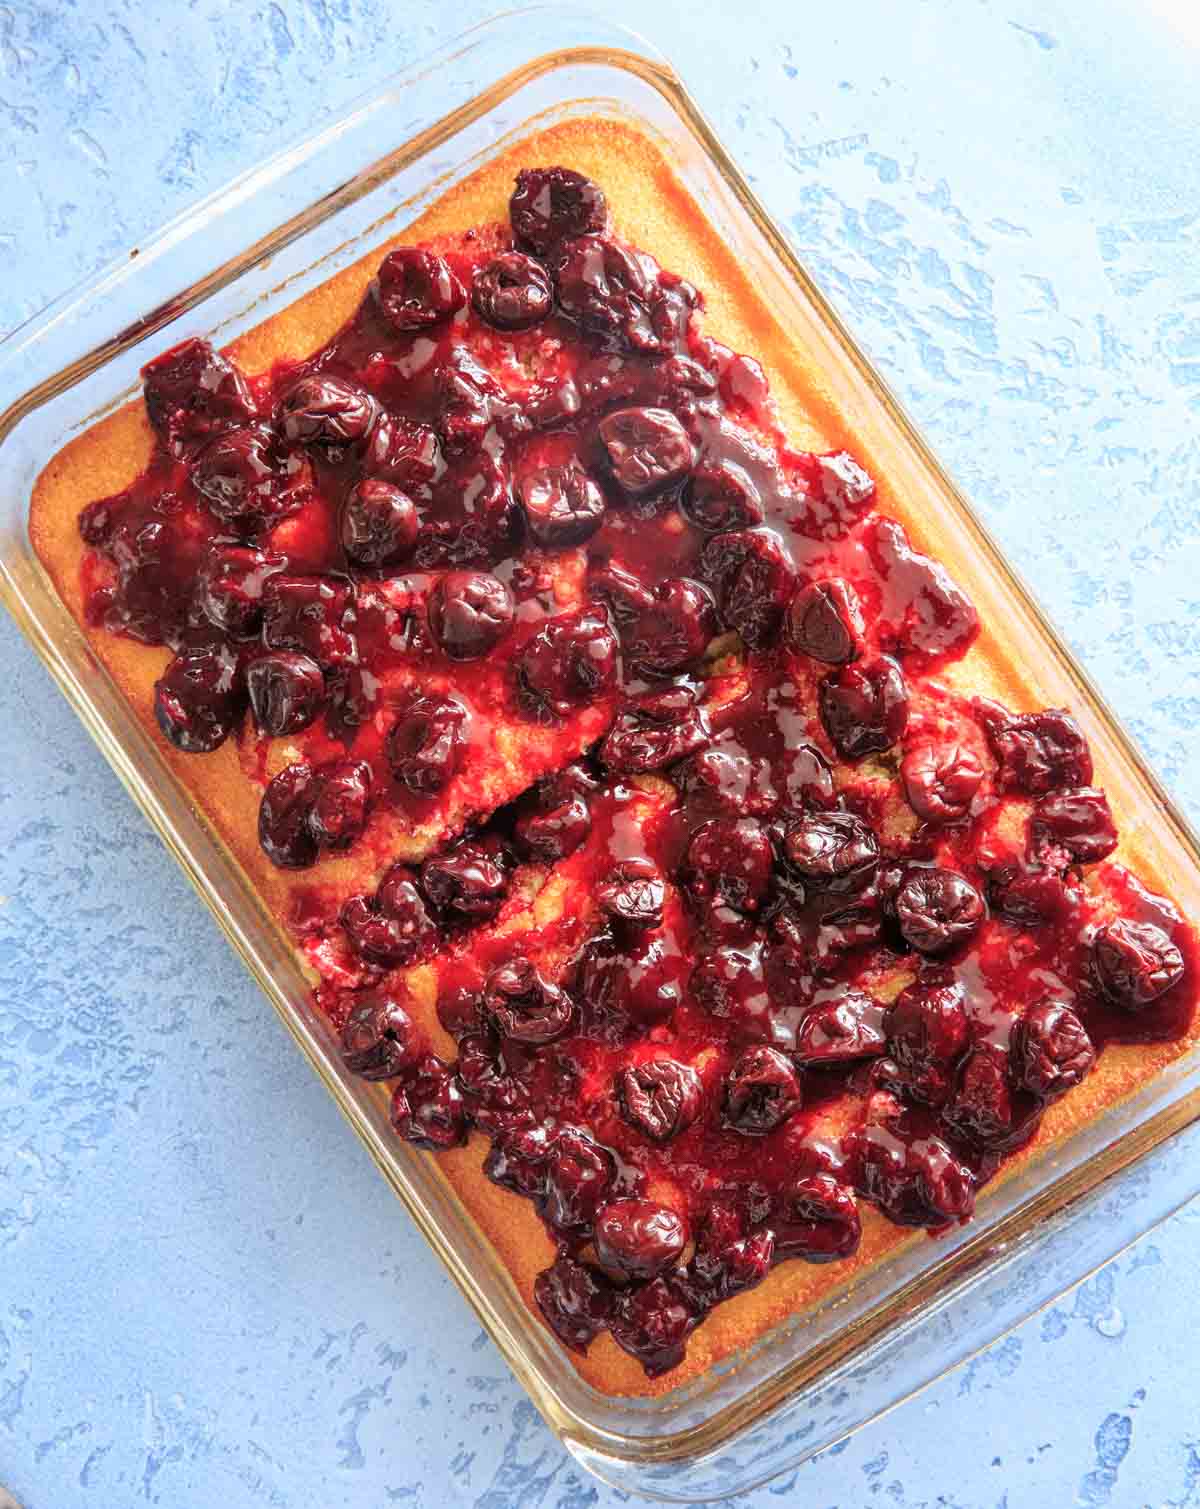 White sheet cake with cherry glaze topping in a glass dish.